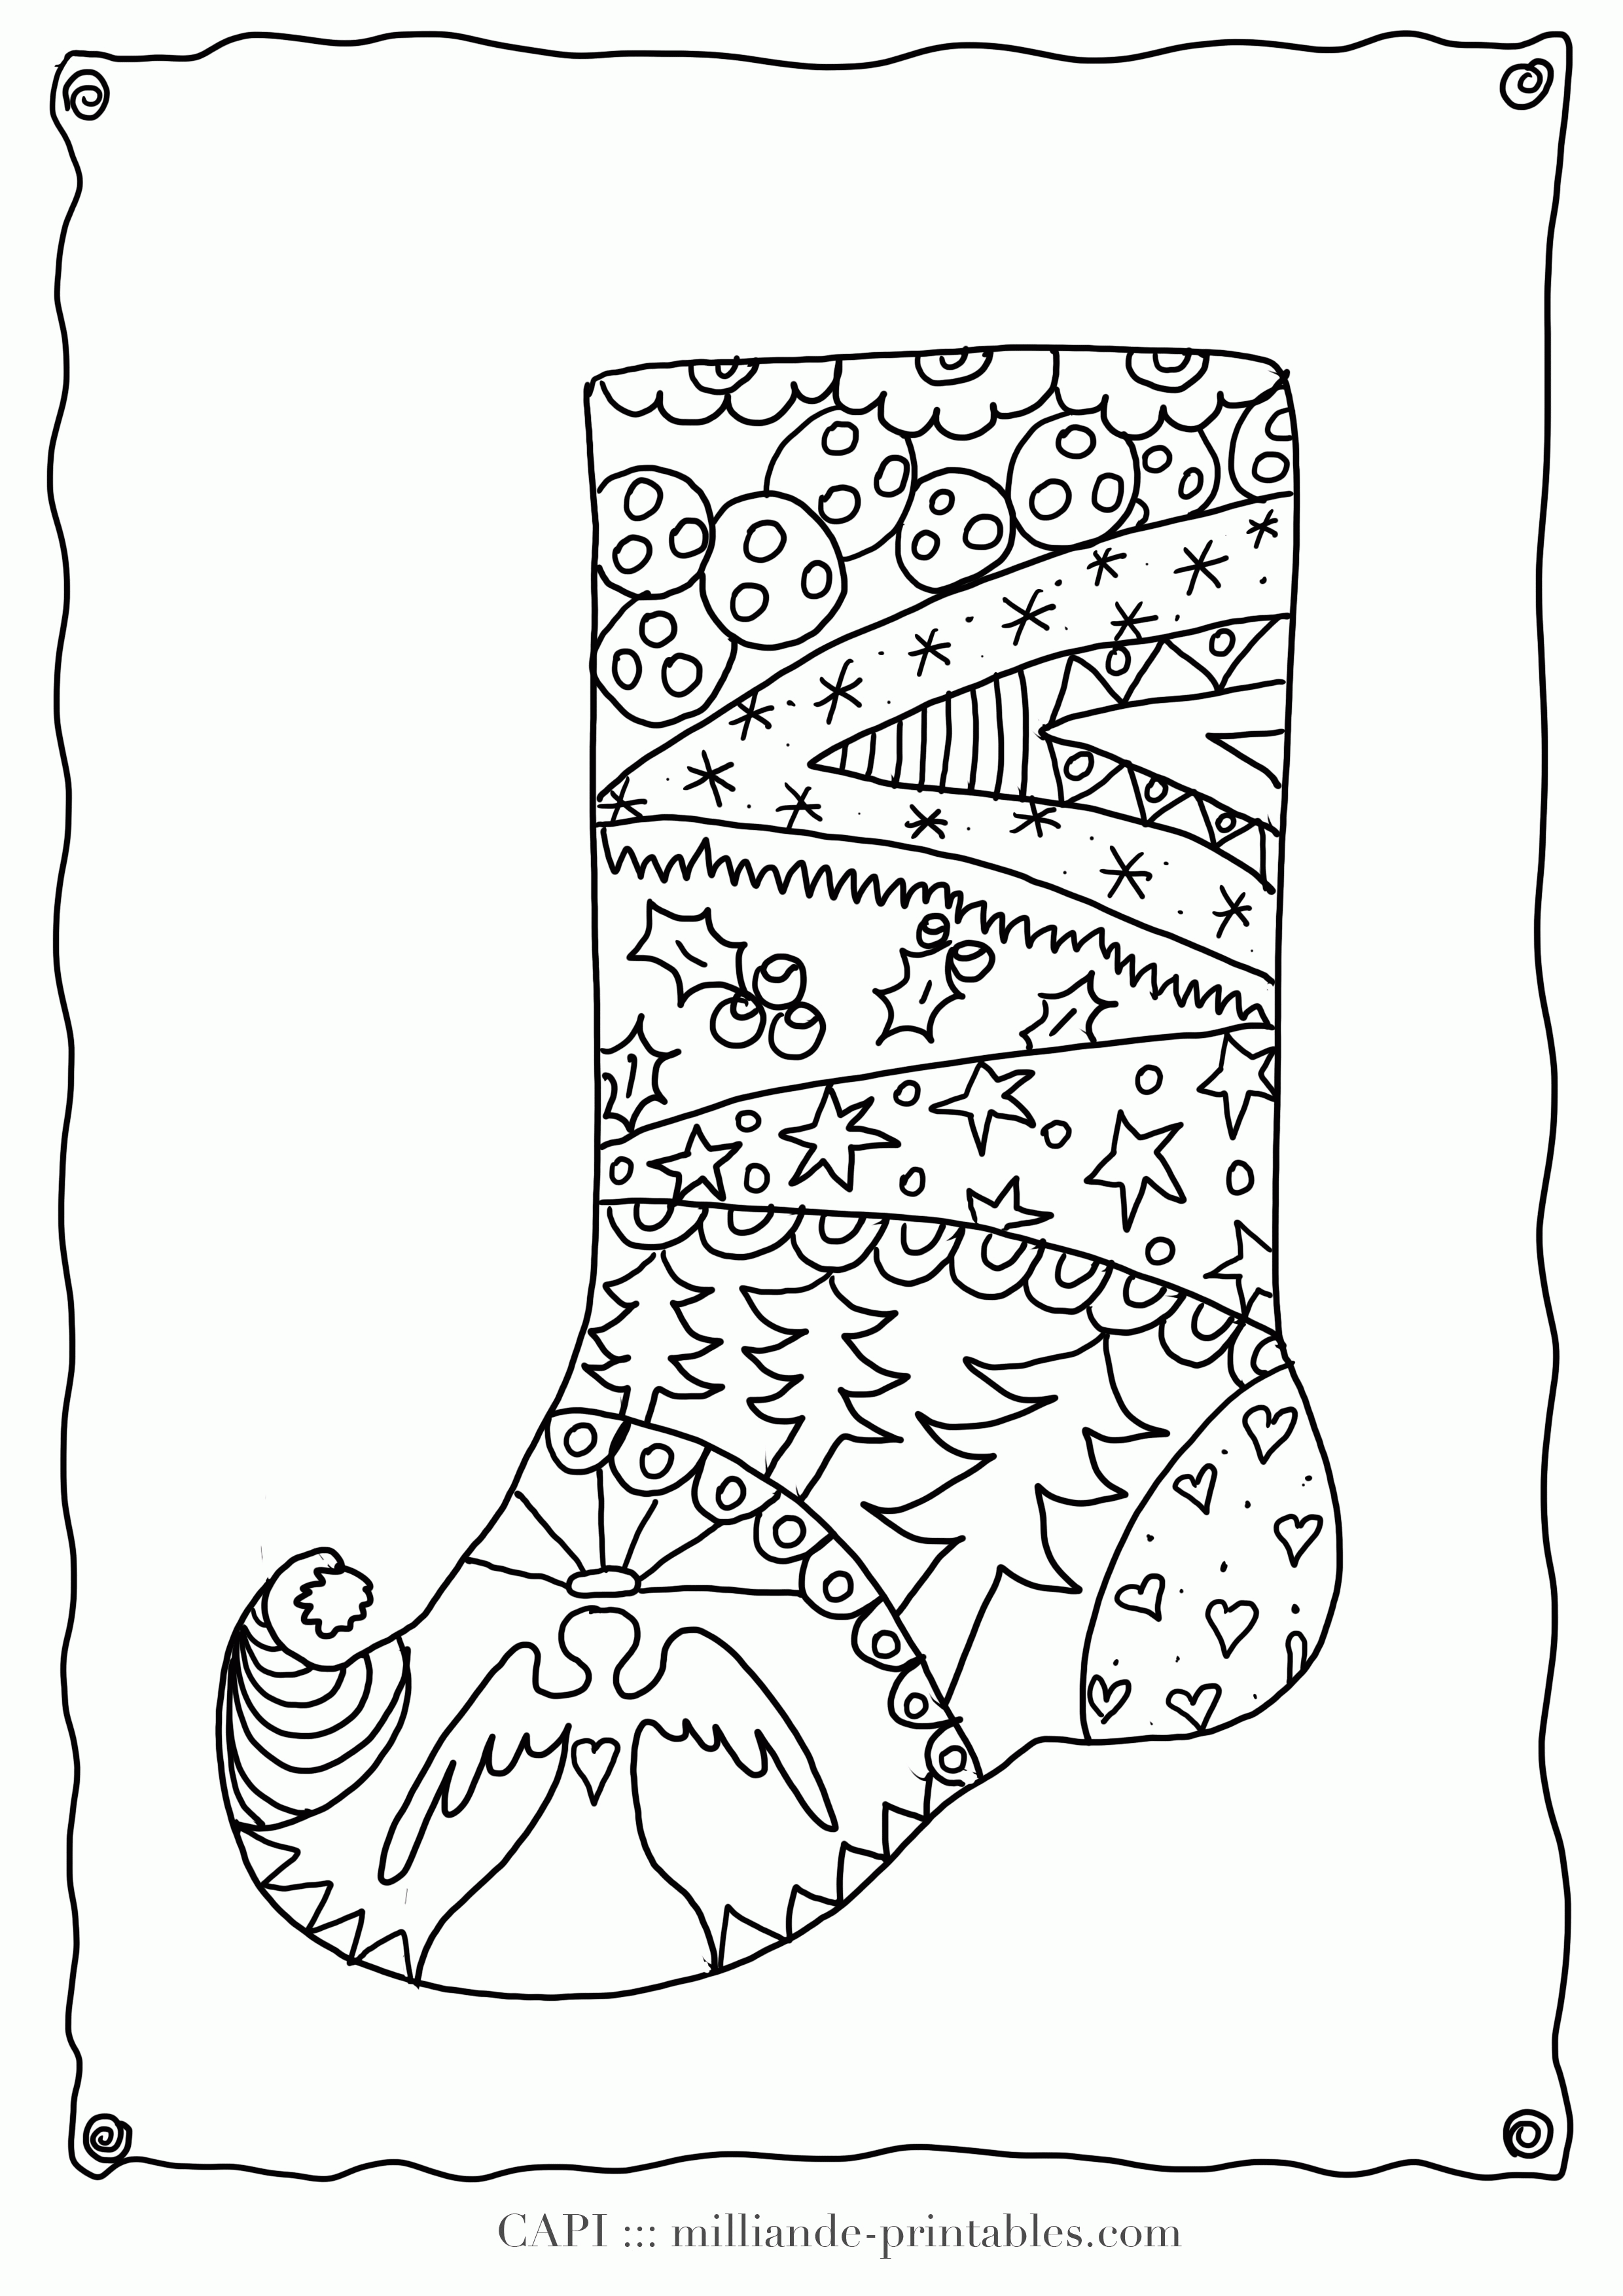 Christmas Coloring Page Stocking, Milliande